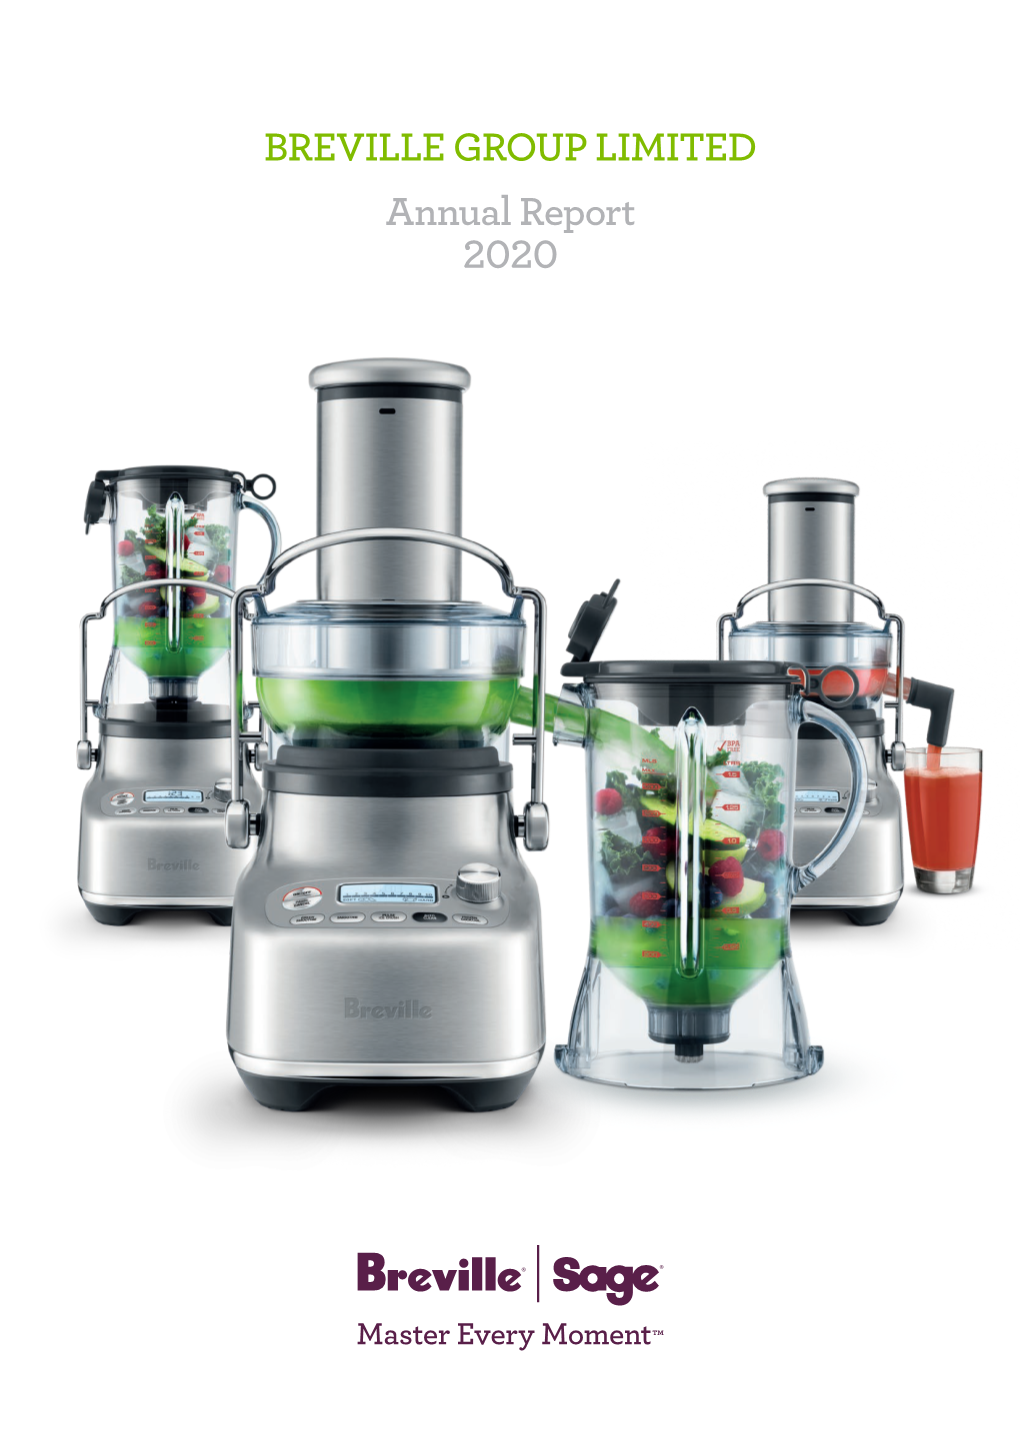 BREVILLE GROUP LIMITED Annual Report 2020 Breville Group Limited Annual Report 2020